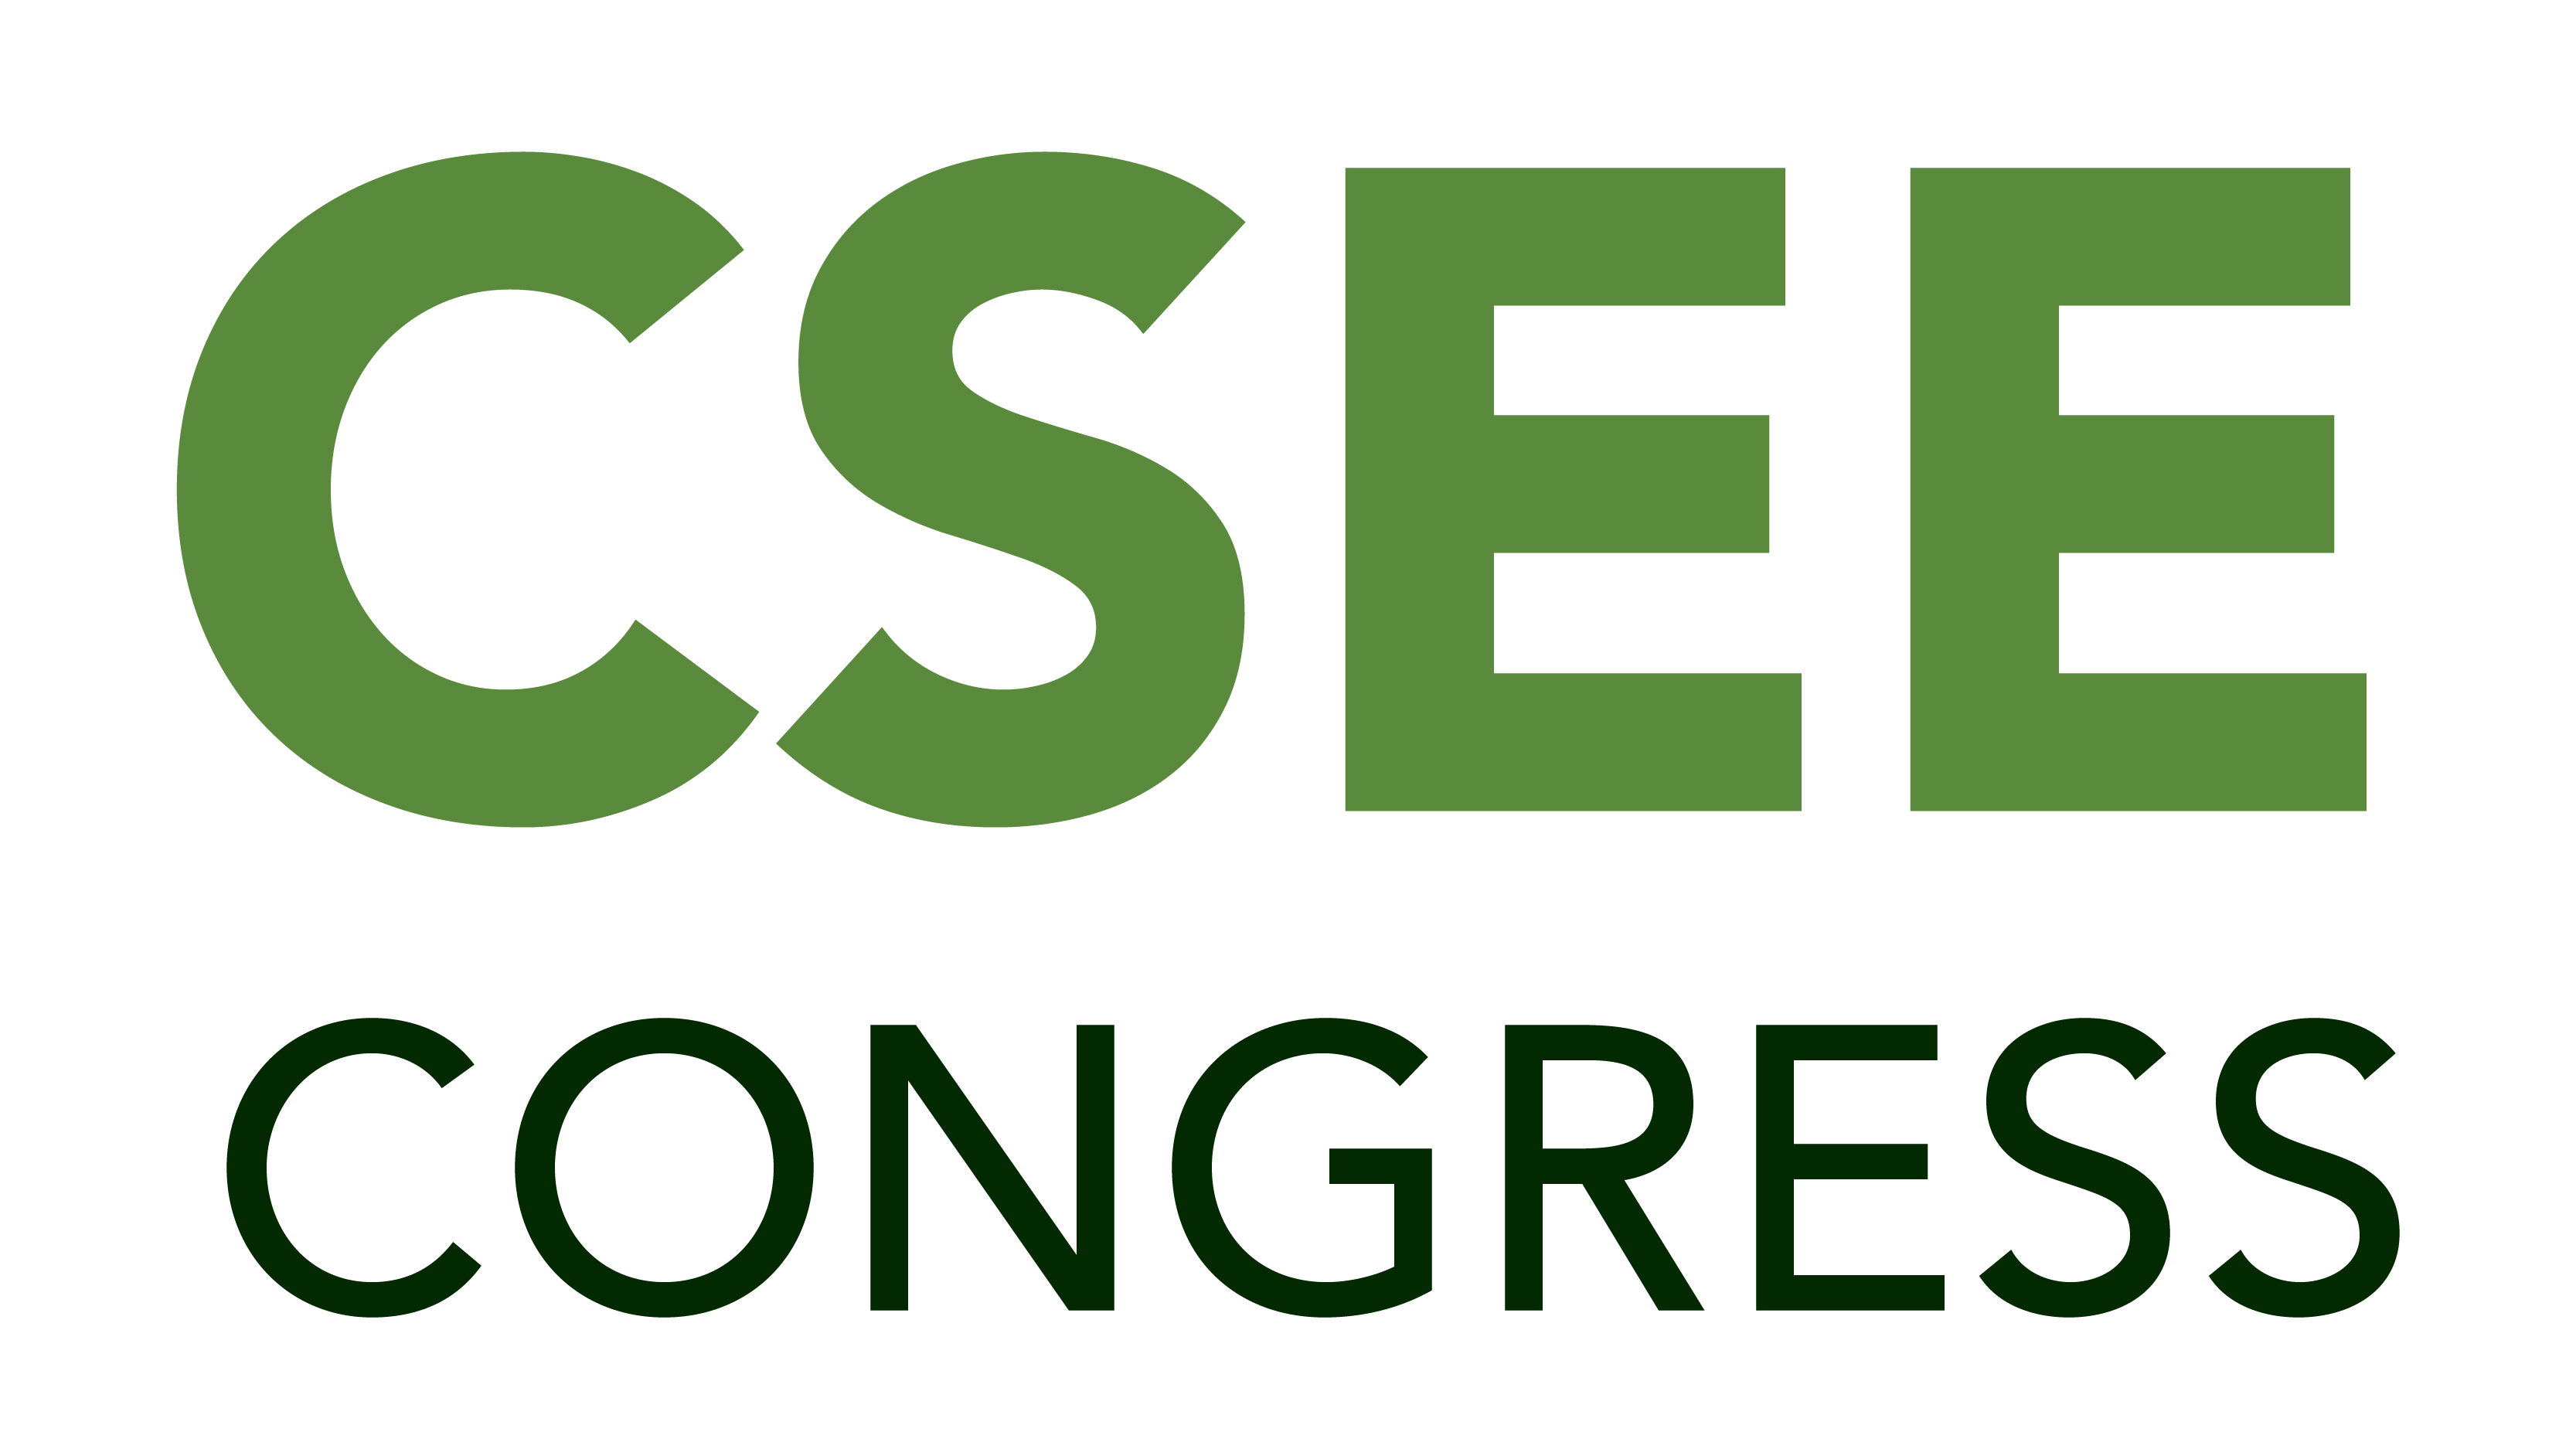 8th World Congress on Civil, Structural, and Environmental Engineering, March, 2023